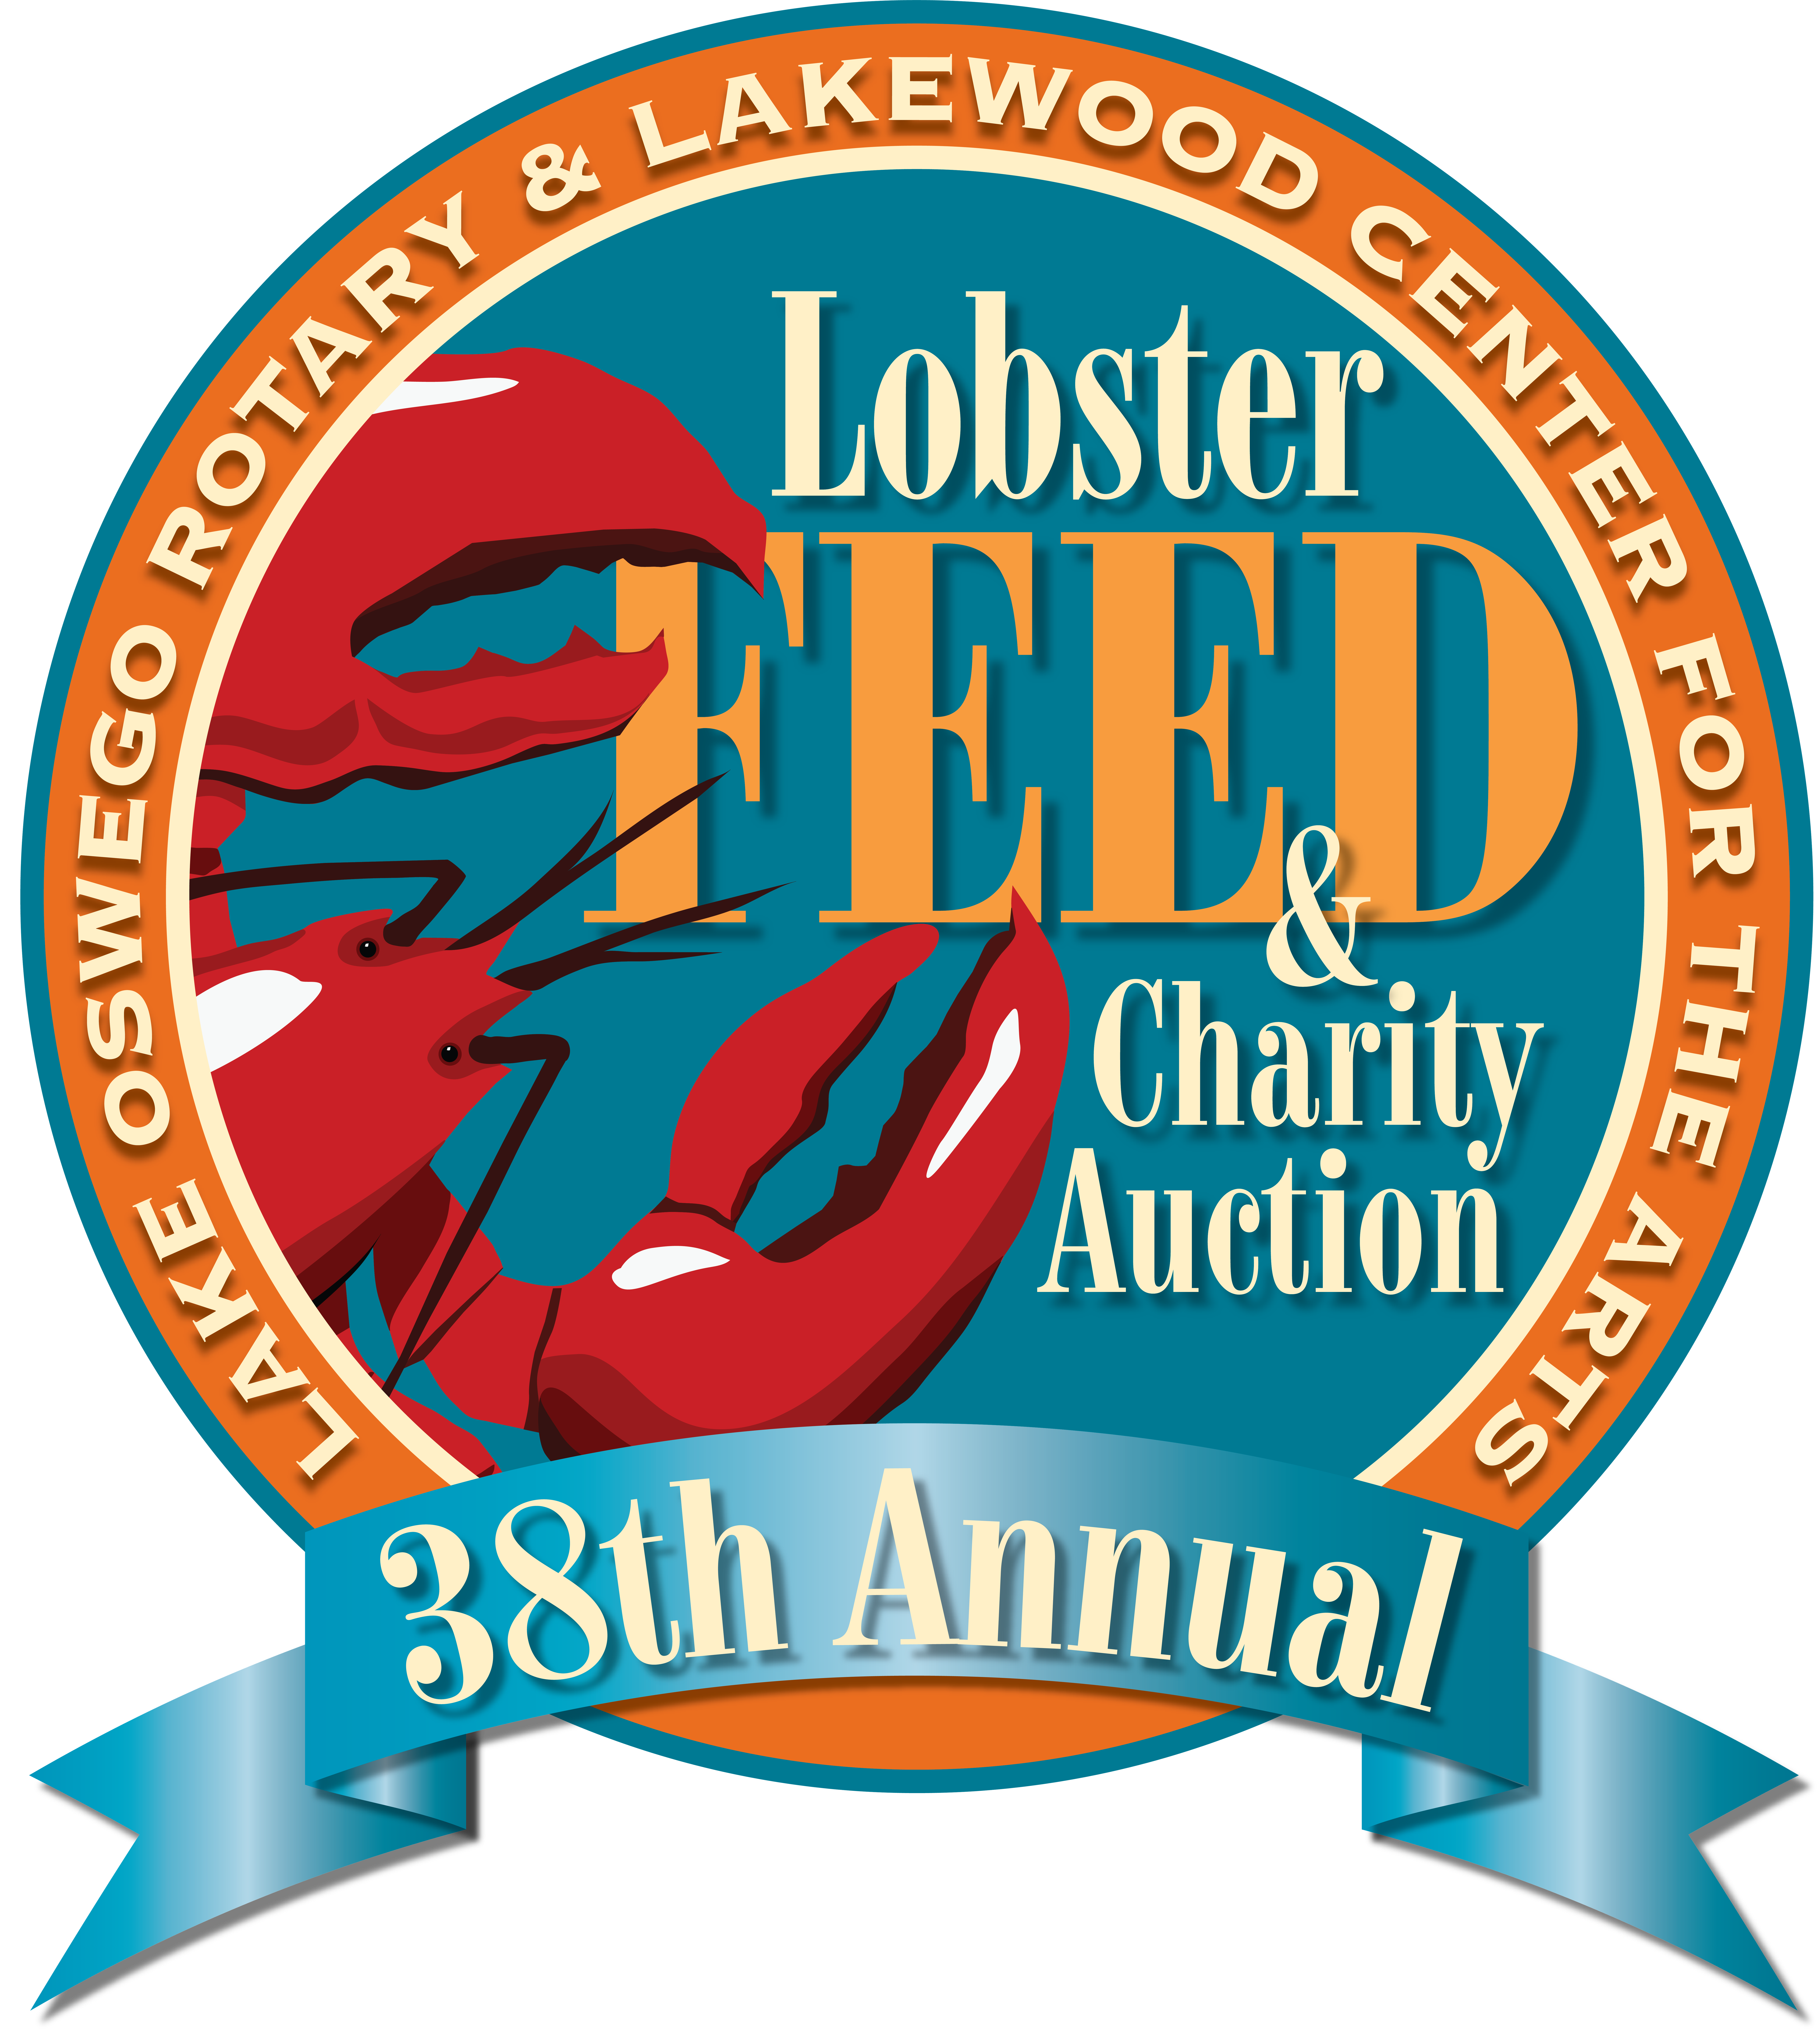 Lobster Feed & Charity Auction